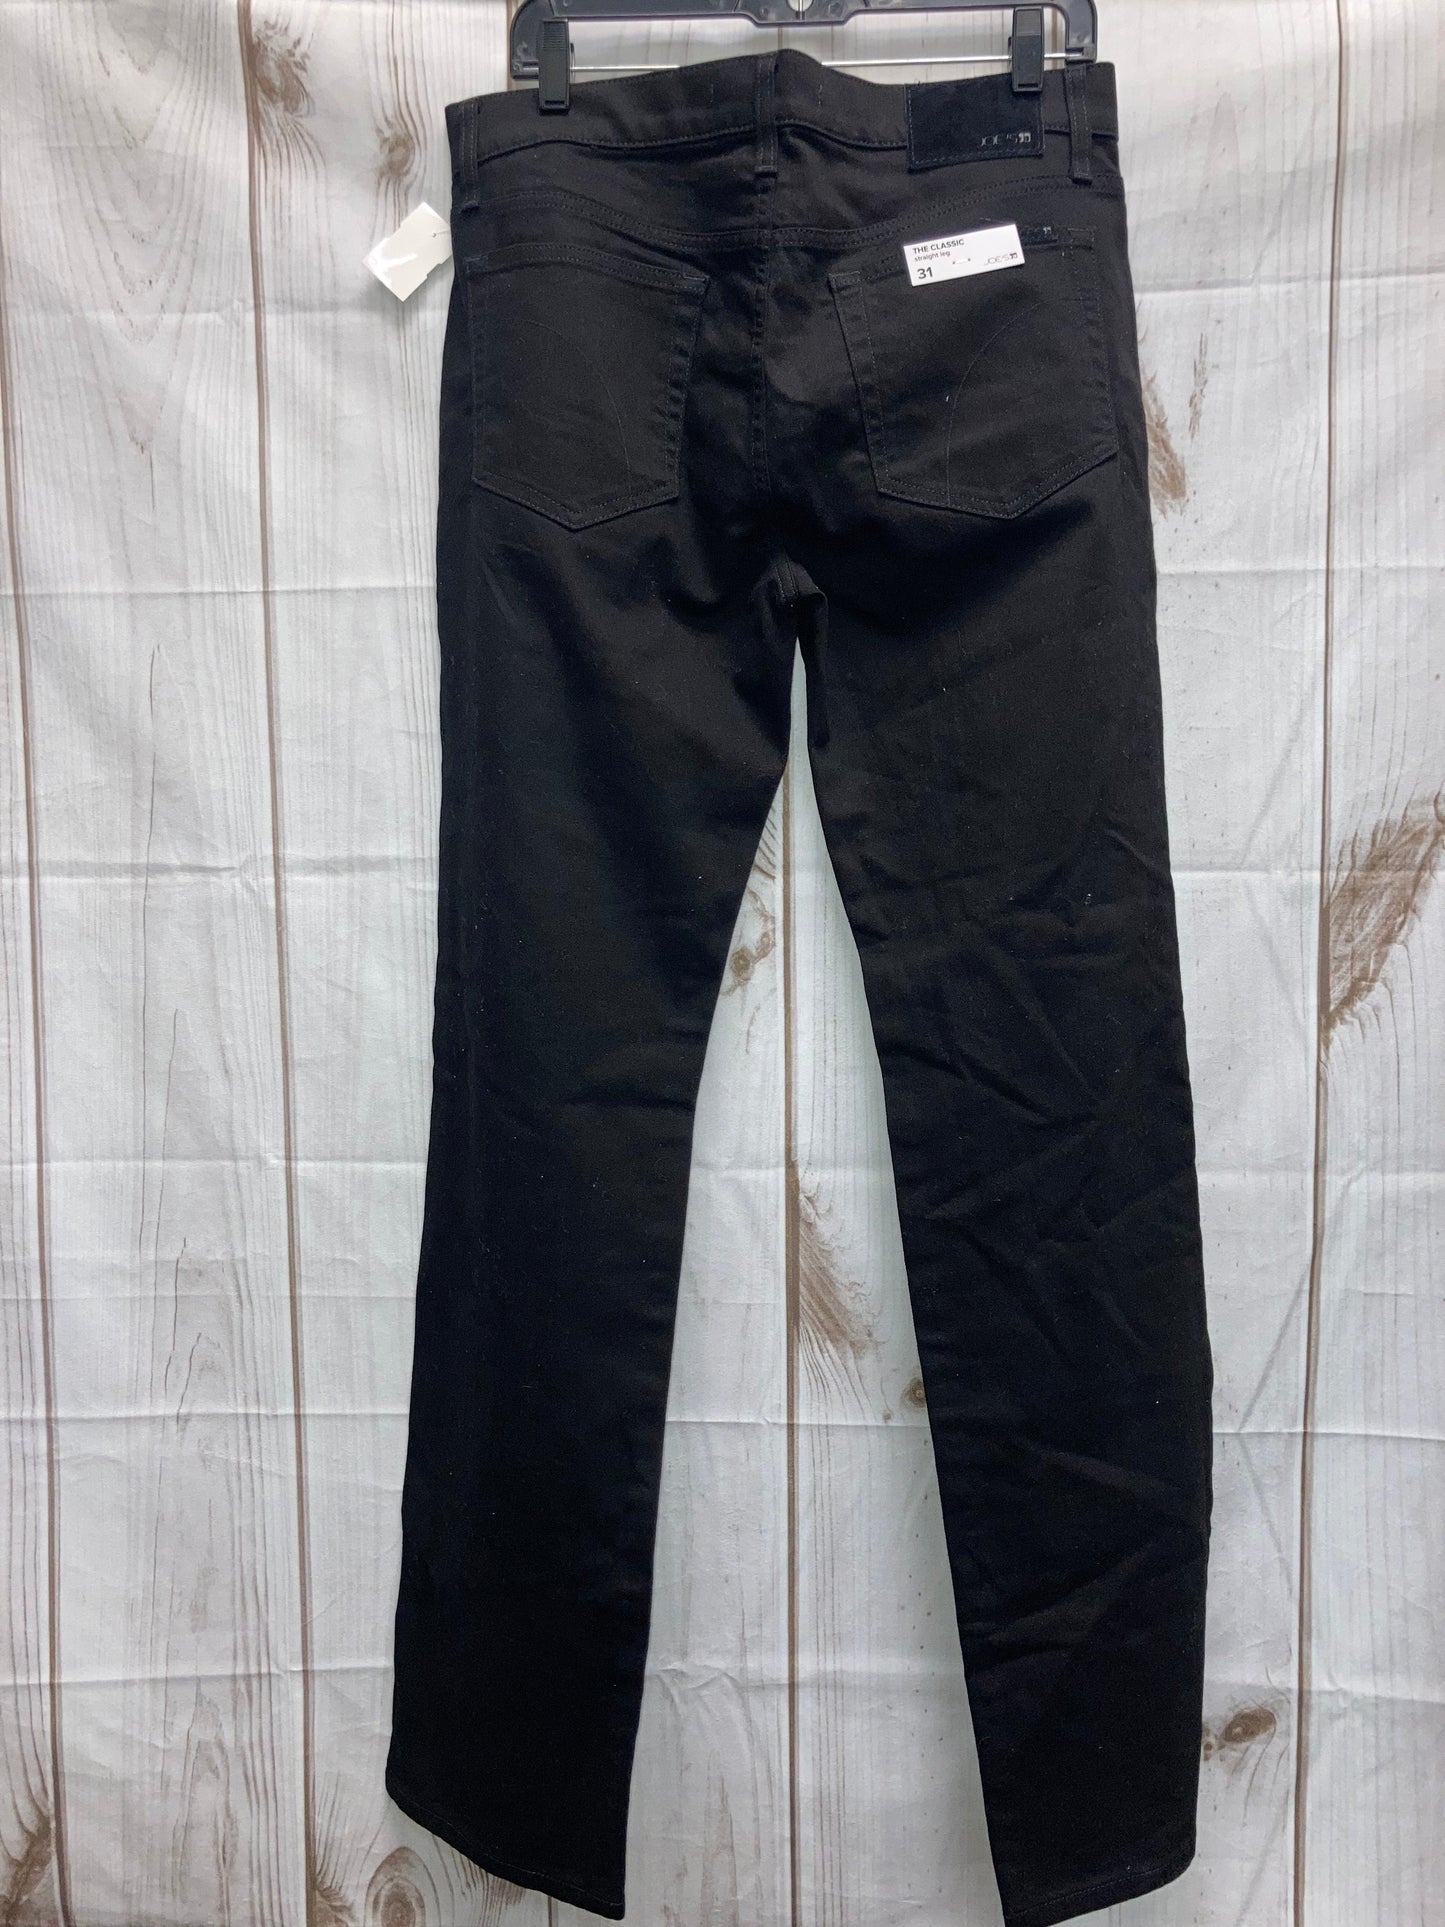 Pants Ankle By Joes Jeans  Size: 12